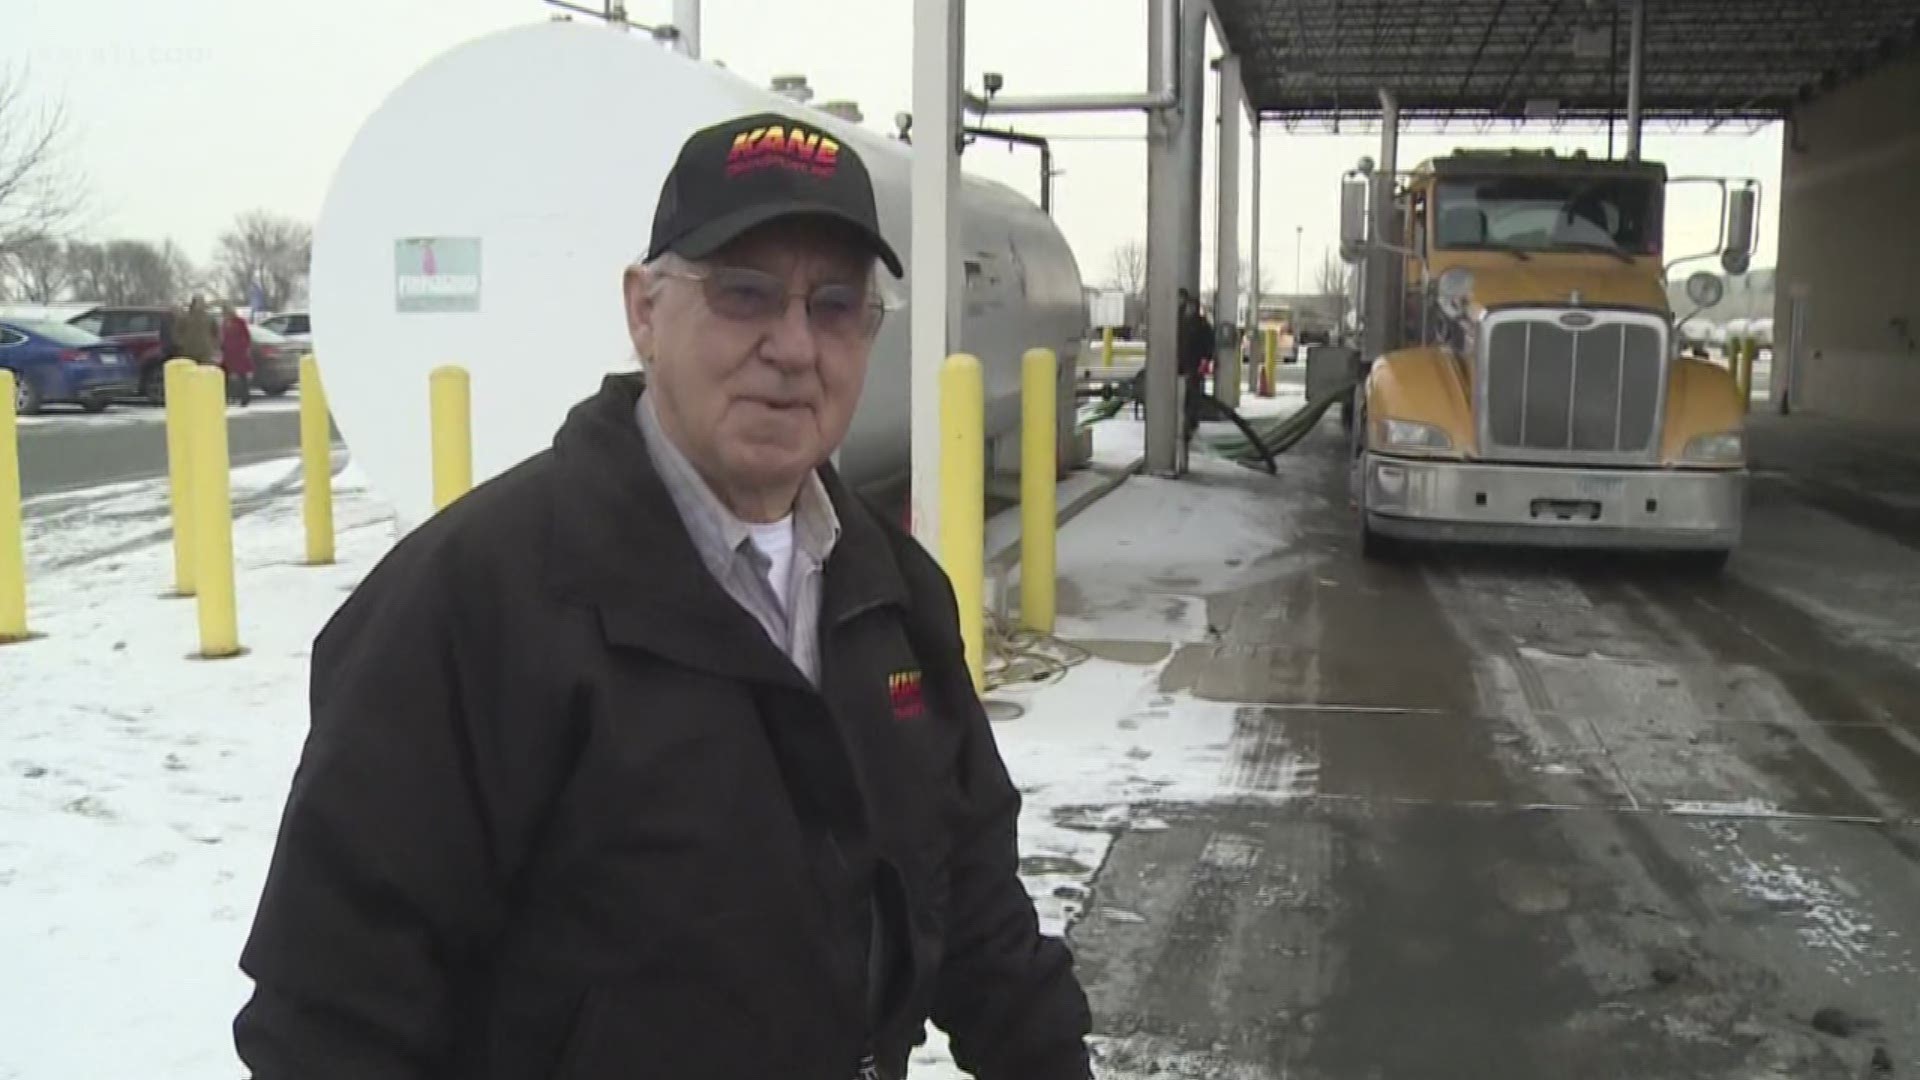 On winter days most of us are happy just getting to work accident free.   
But a Minnesota truck driver has done better than that.  Art Stoen's incredible streak has just earned him one of the highest honors in his field. 
Boyd Huppert shares his story.